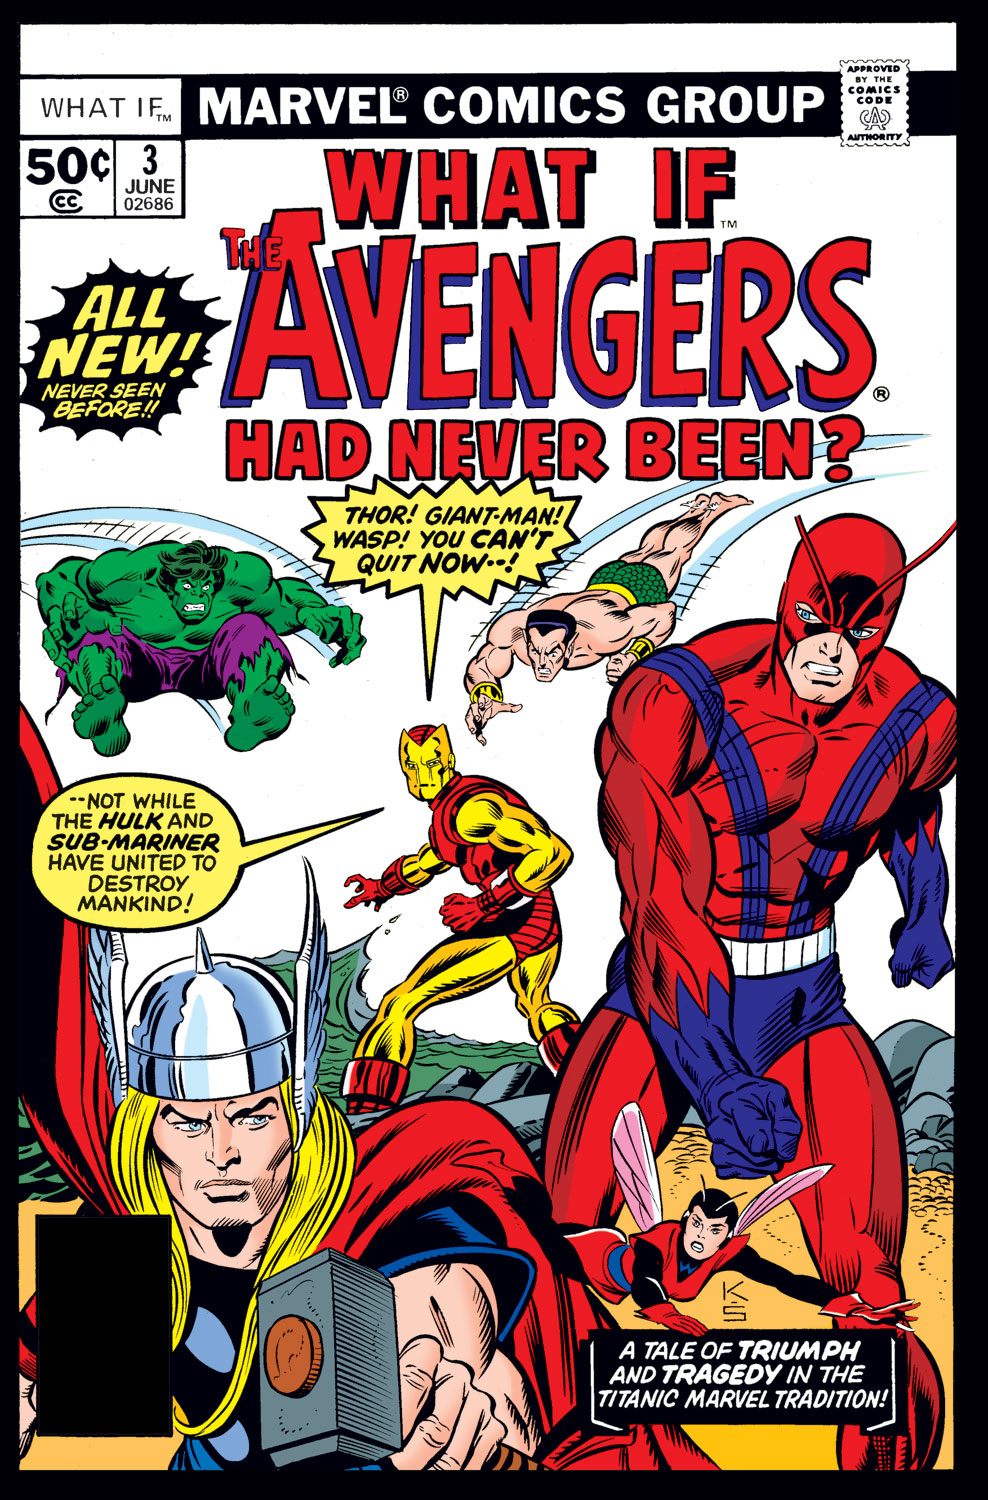 What If? (1977) issue 3 - The Avengers had never been - Page 1